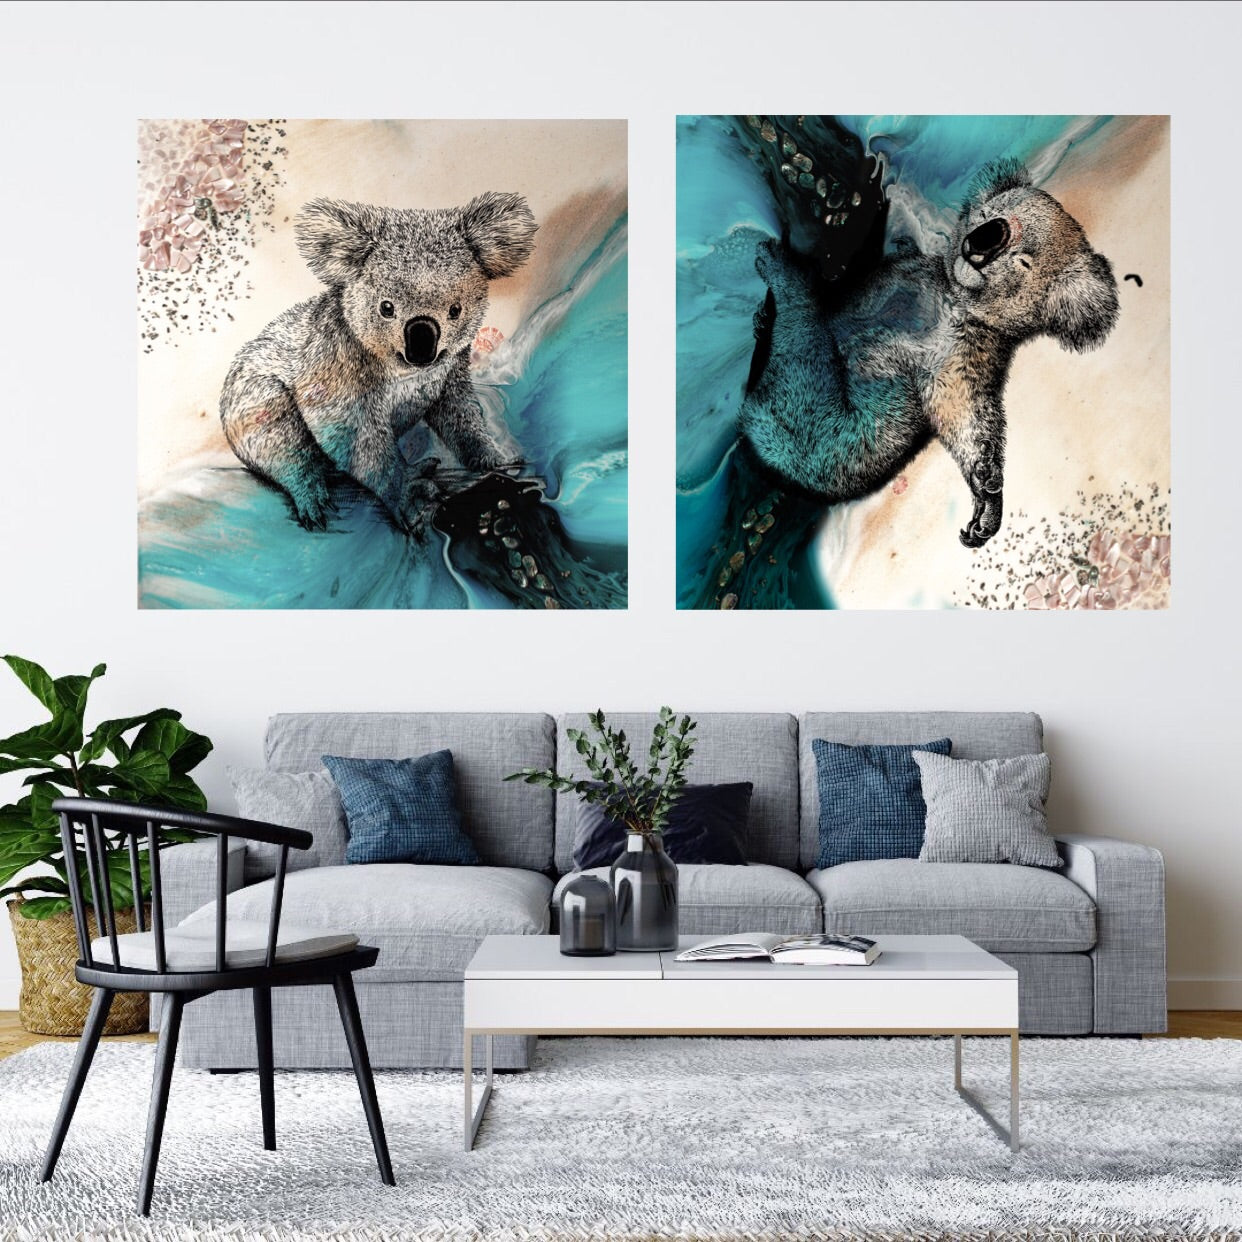 Abstract Seascape. Teal seascape with Koala. Art Print. Antuanelle 4 Sleeping Beauty. Print for WIRES Wildlife Rescue. Limited Edition